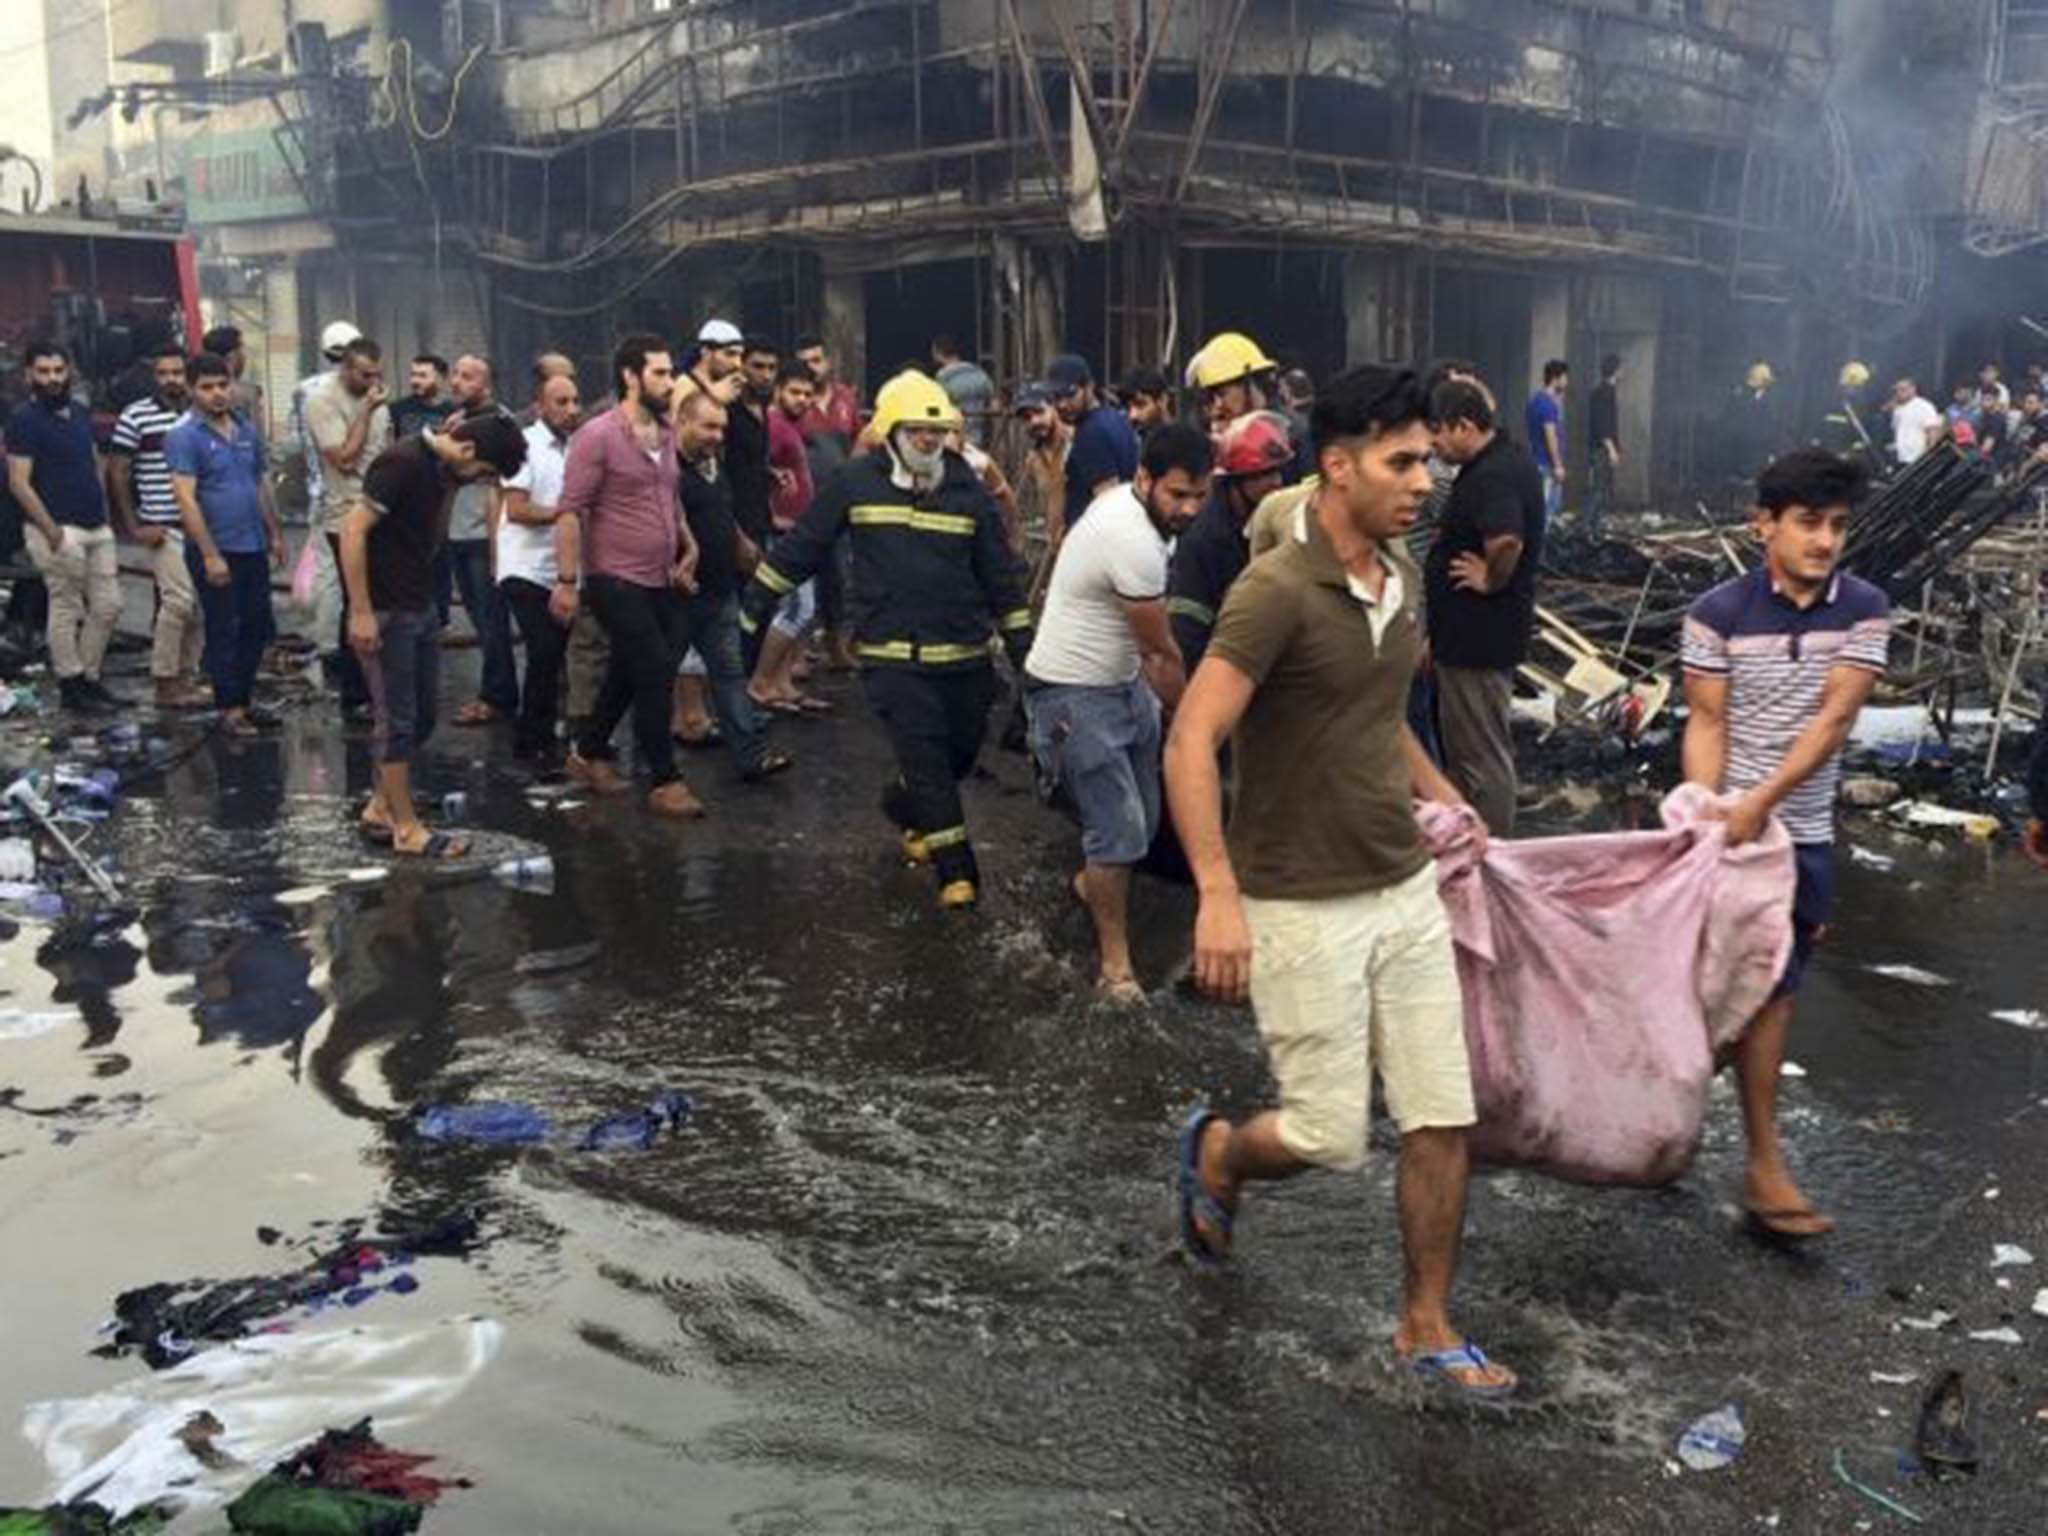 Iraqi firefighters and civilians work together to evacuate bodies of victims